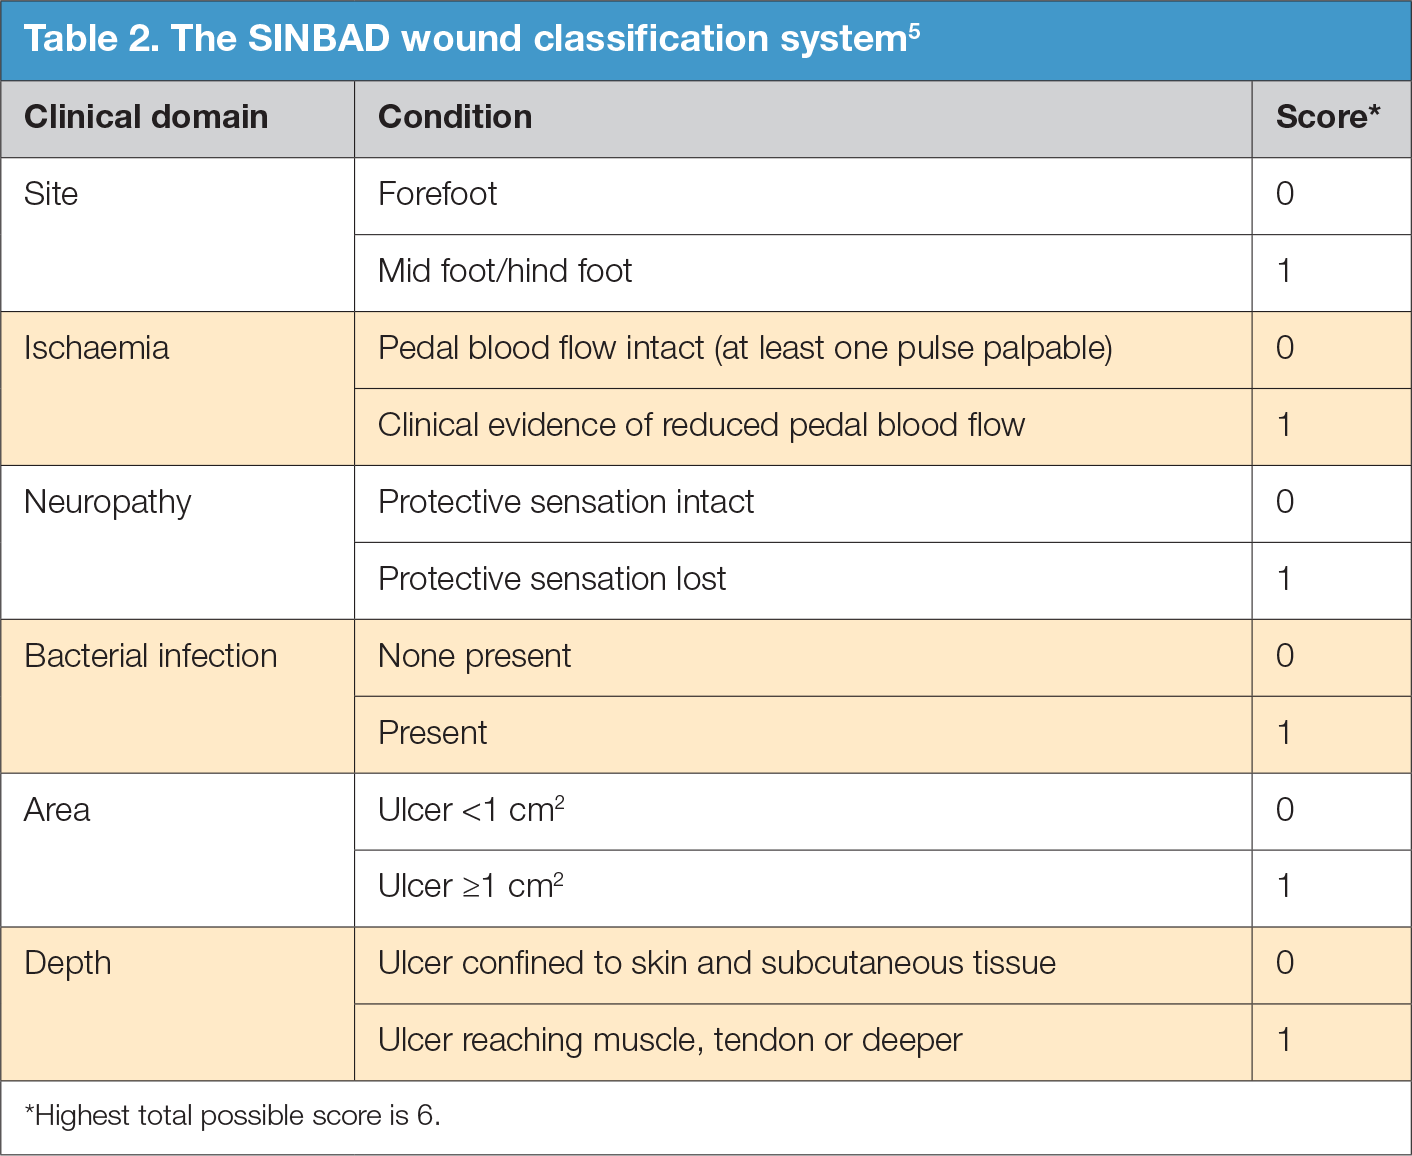 The SINBAD wound classification system